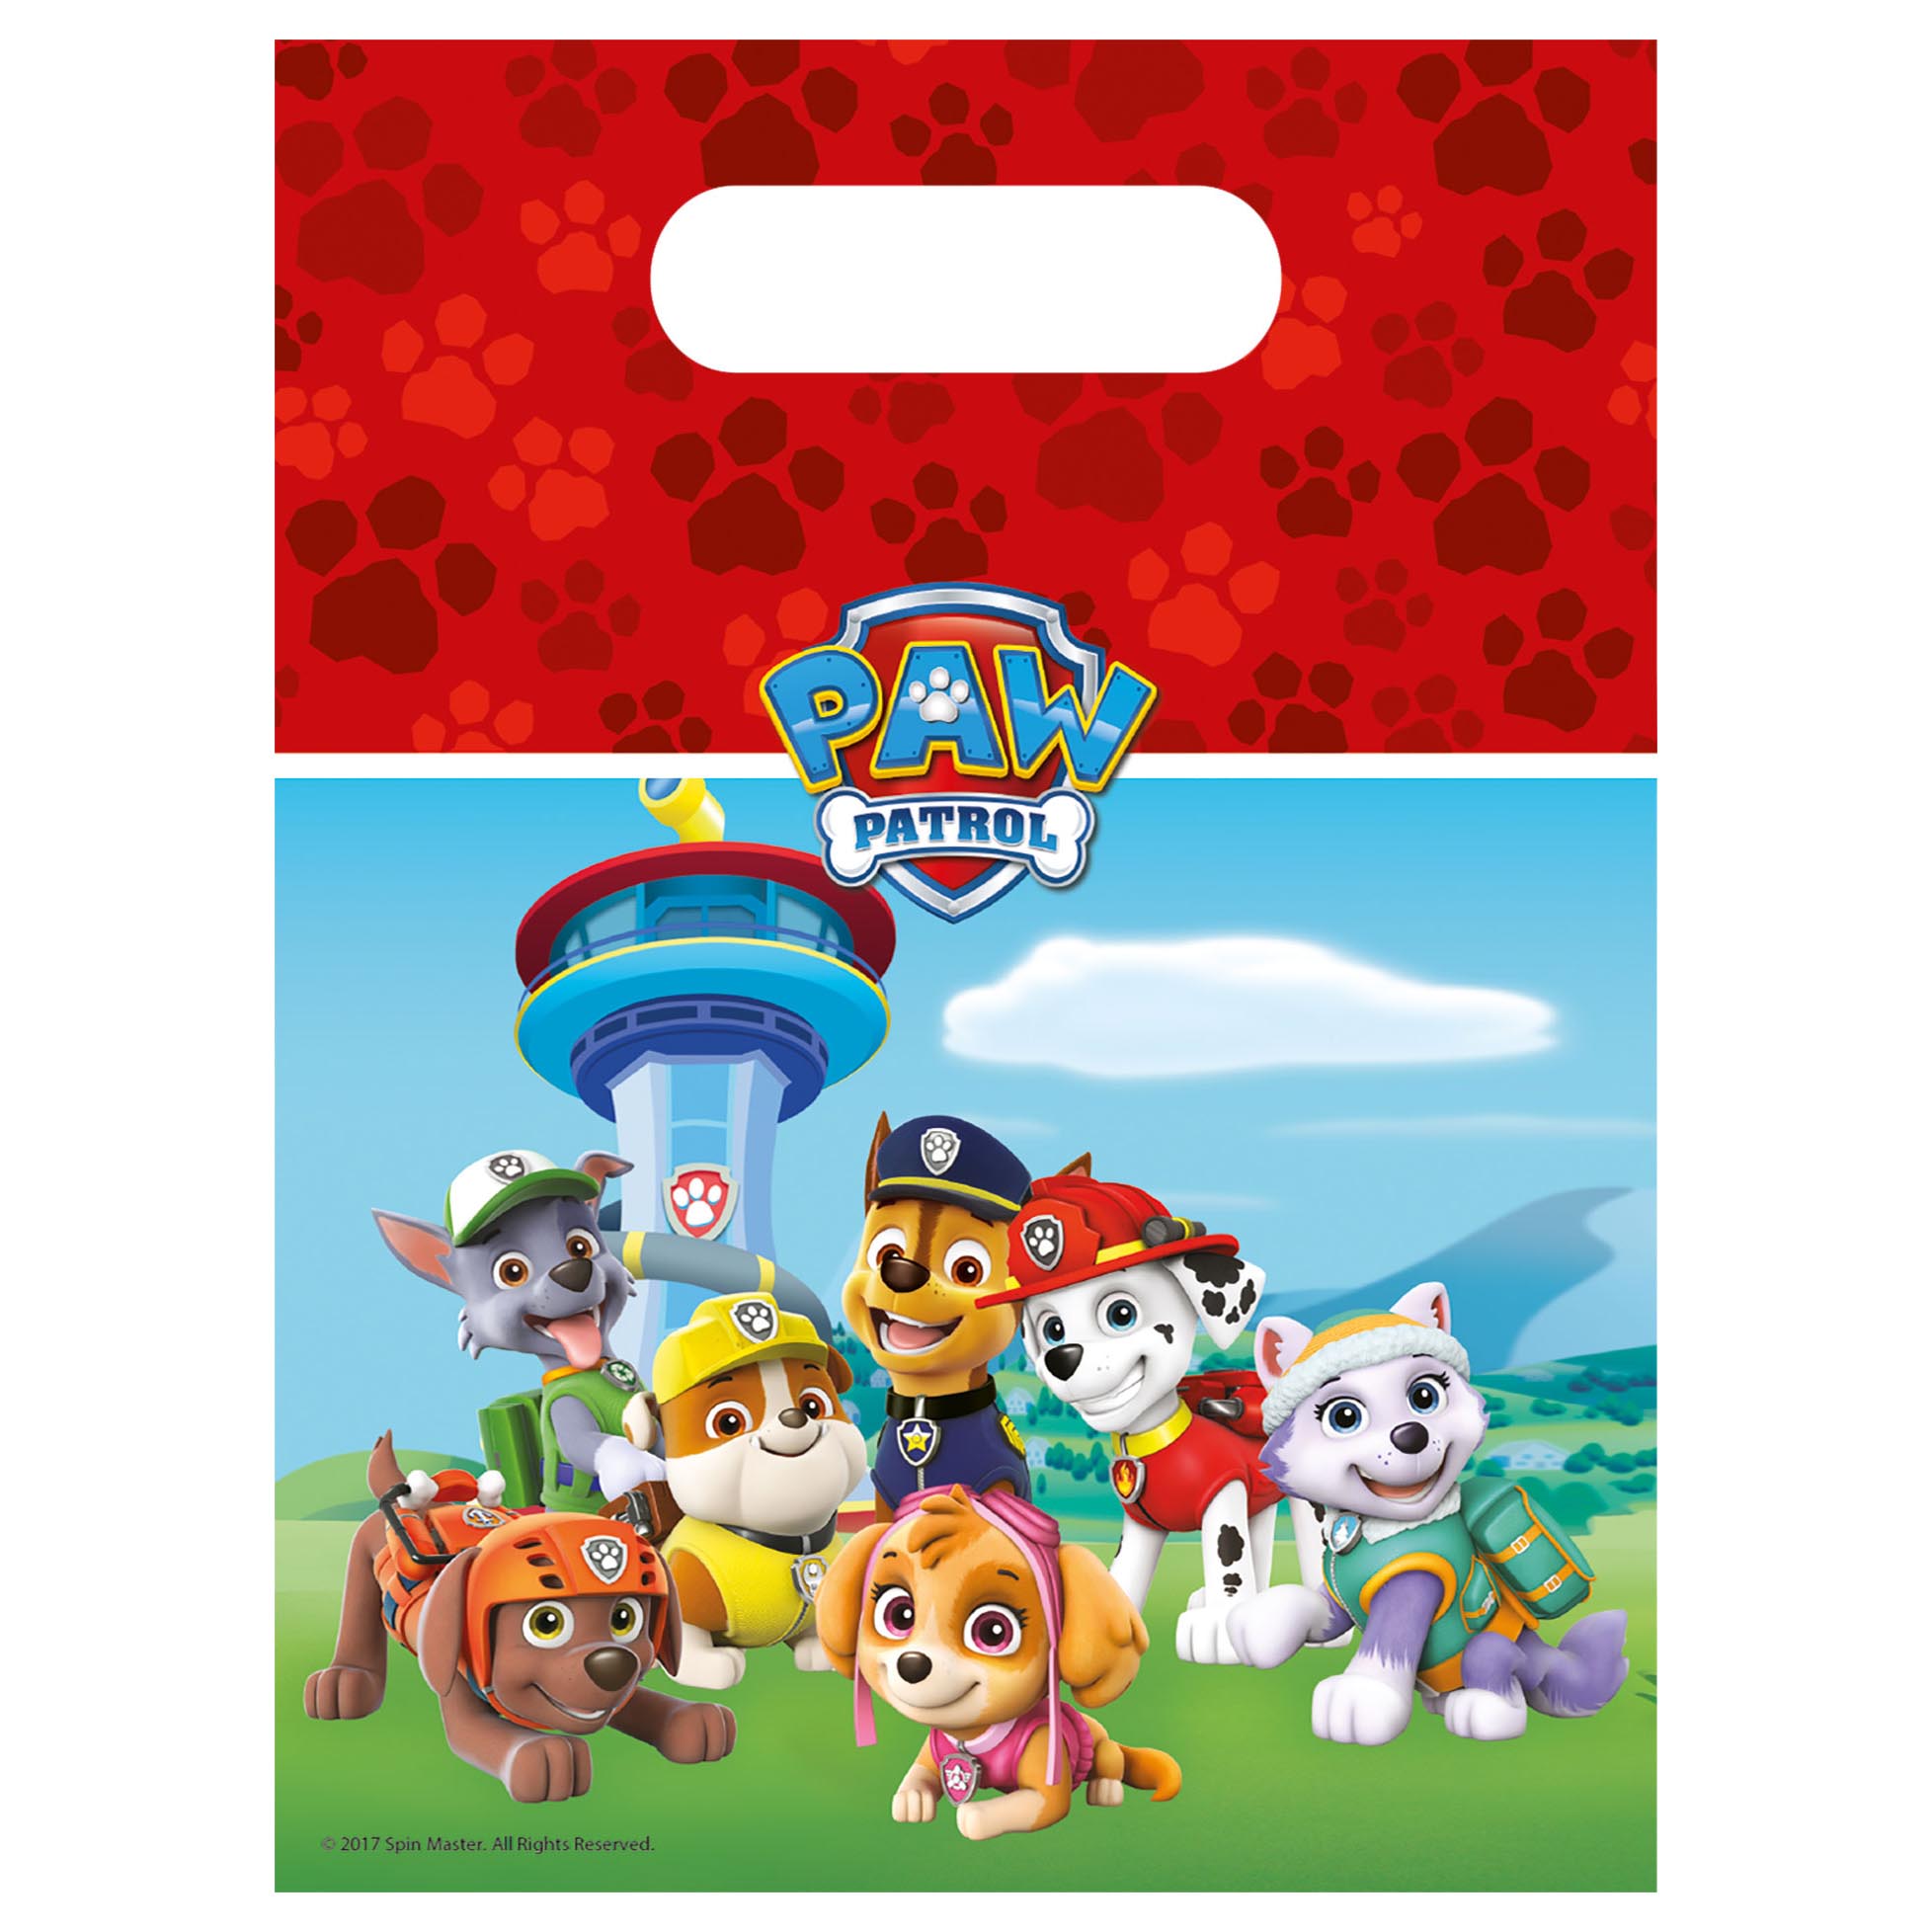 Paw Patrol Ready for Action Party Tableware & Decorations Bundle - 16 Guests